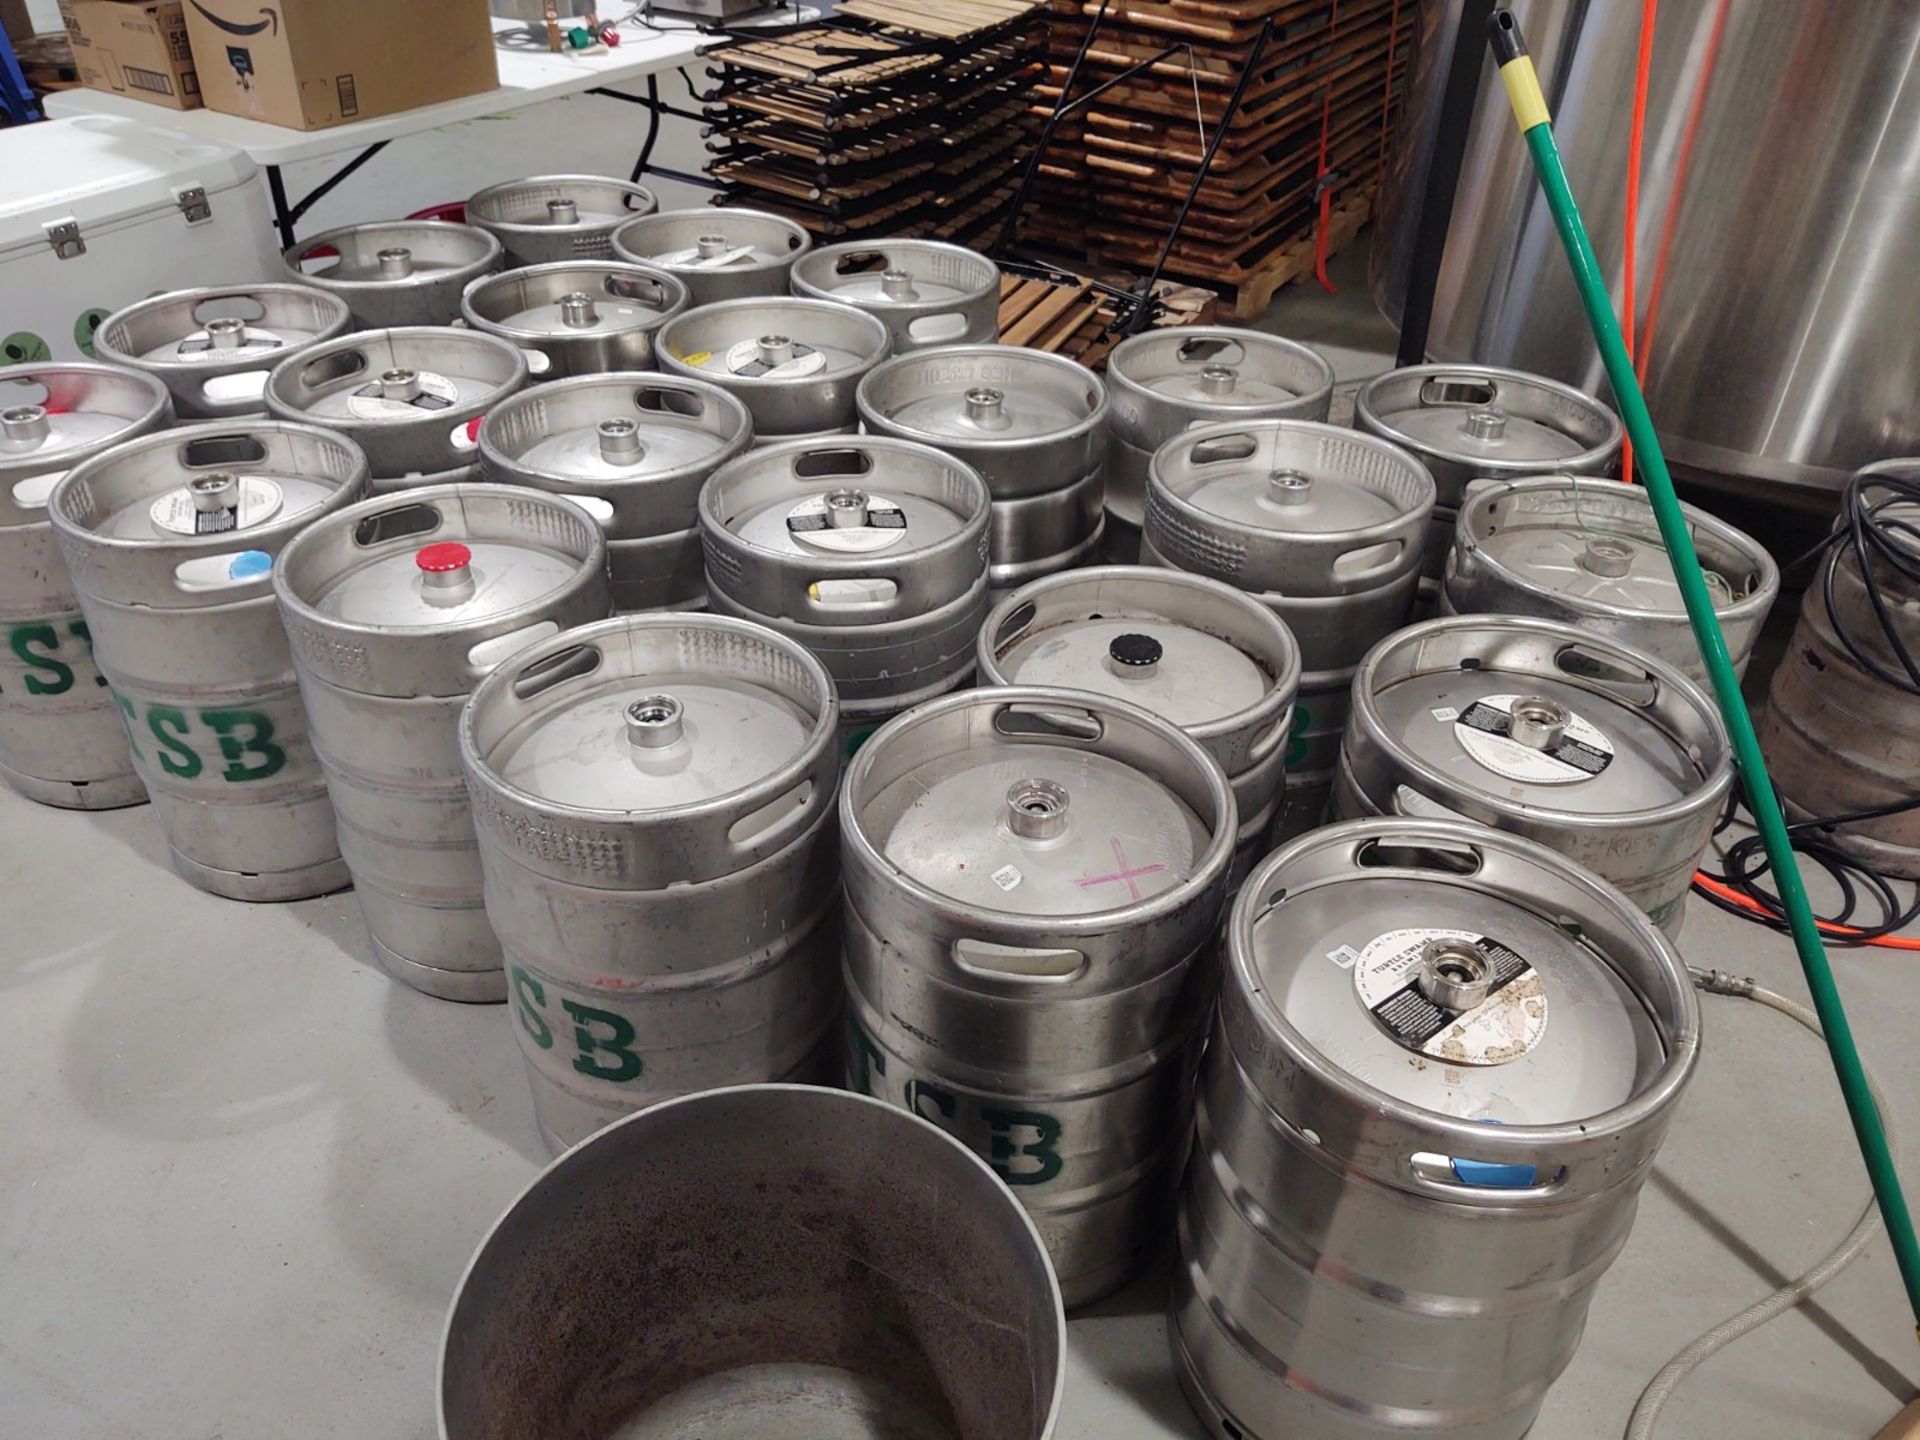 (5) 1/2 Barrel Kegs (ALL EMPTY) (BEING SOLD BY THE PIECE - QUANTITY x PRICE)